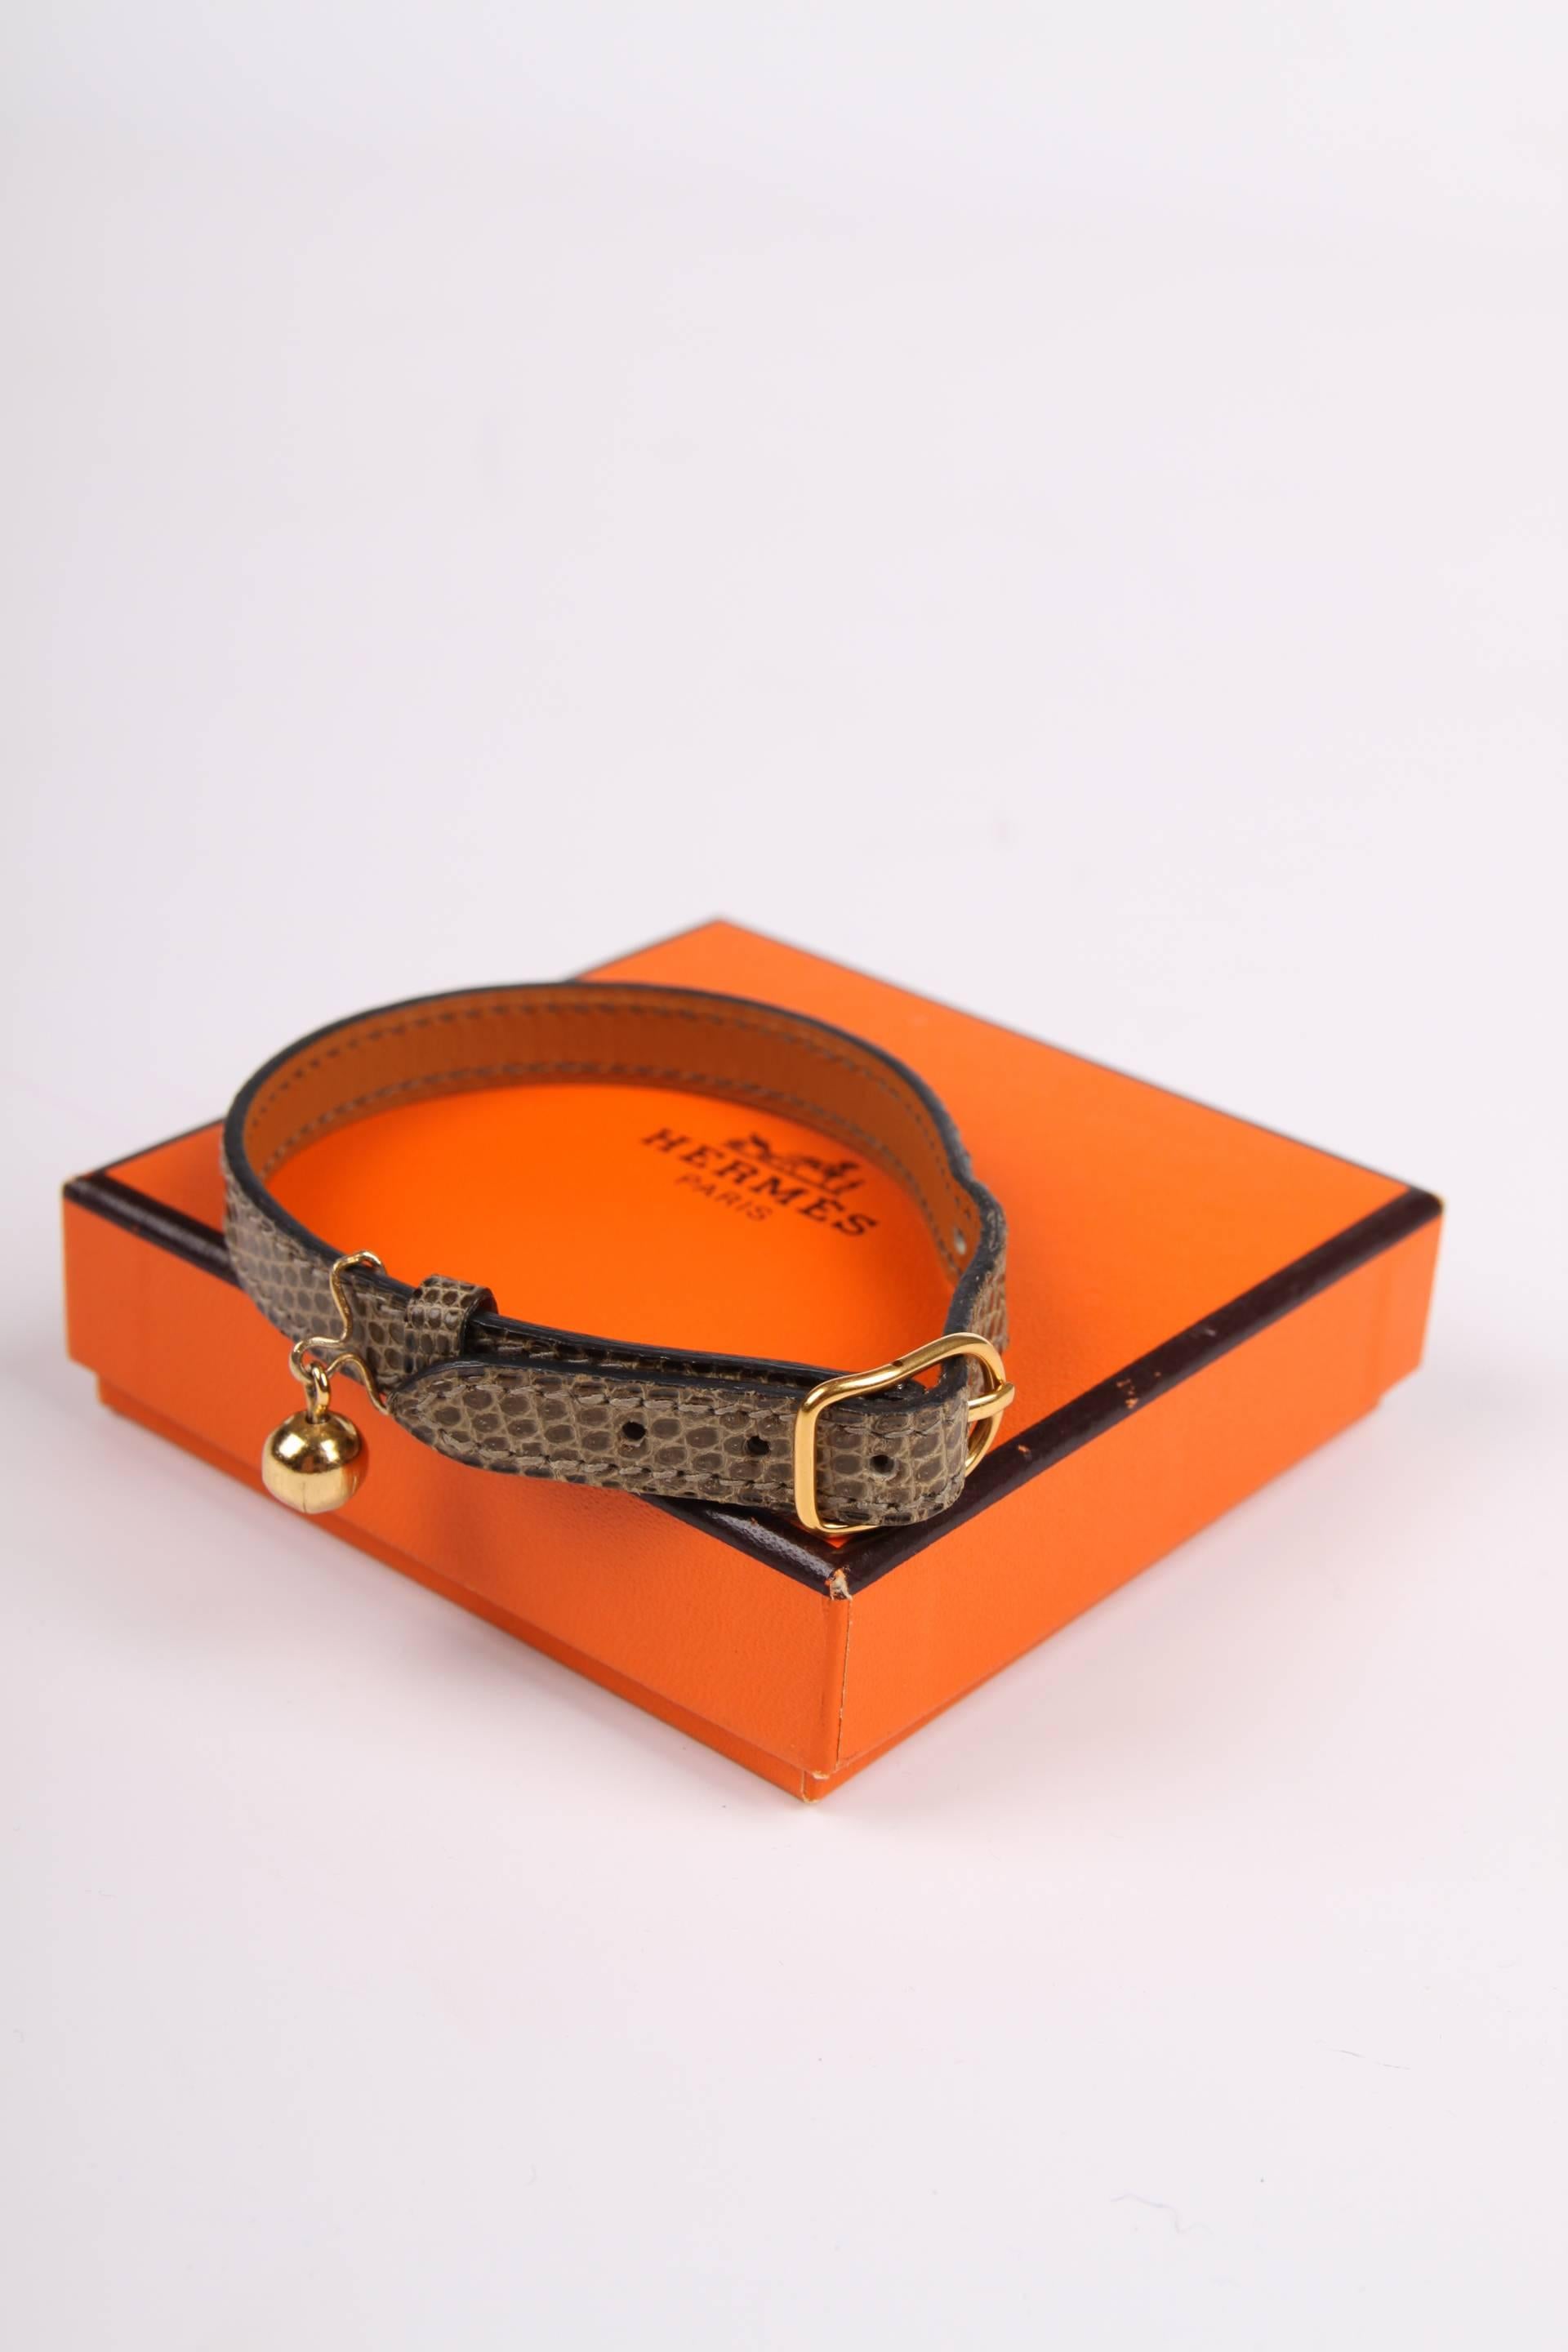 Who wants a fancy cat? A super cool Hermès collar for your furry and precious sweetheart!

Crafted in wonderful green lizard leather with a gold-tone buckle and a small round gold-tone bell. Total length of the strap is 25,5 centimeters.

In perfect